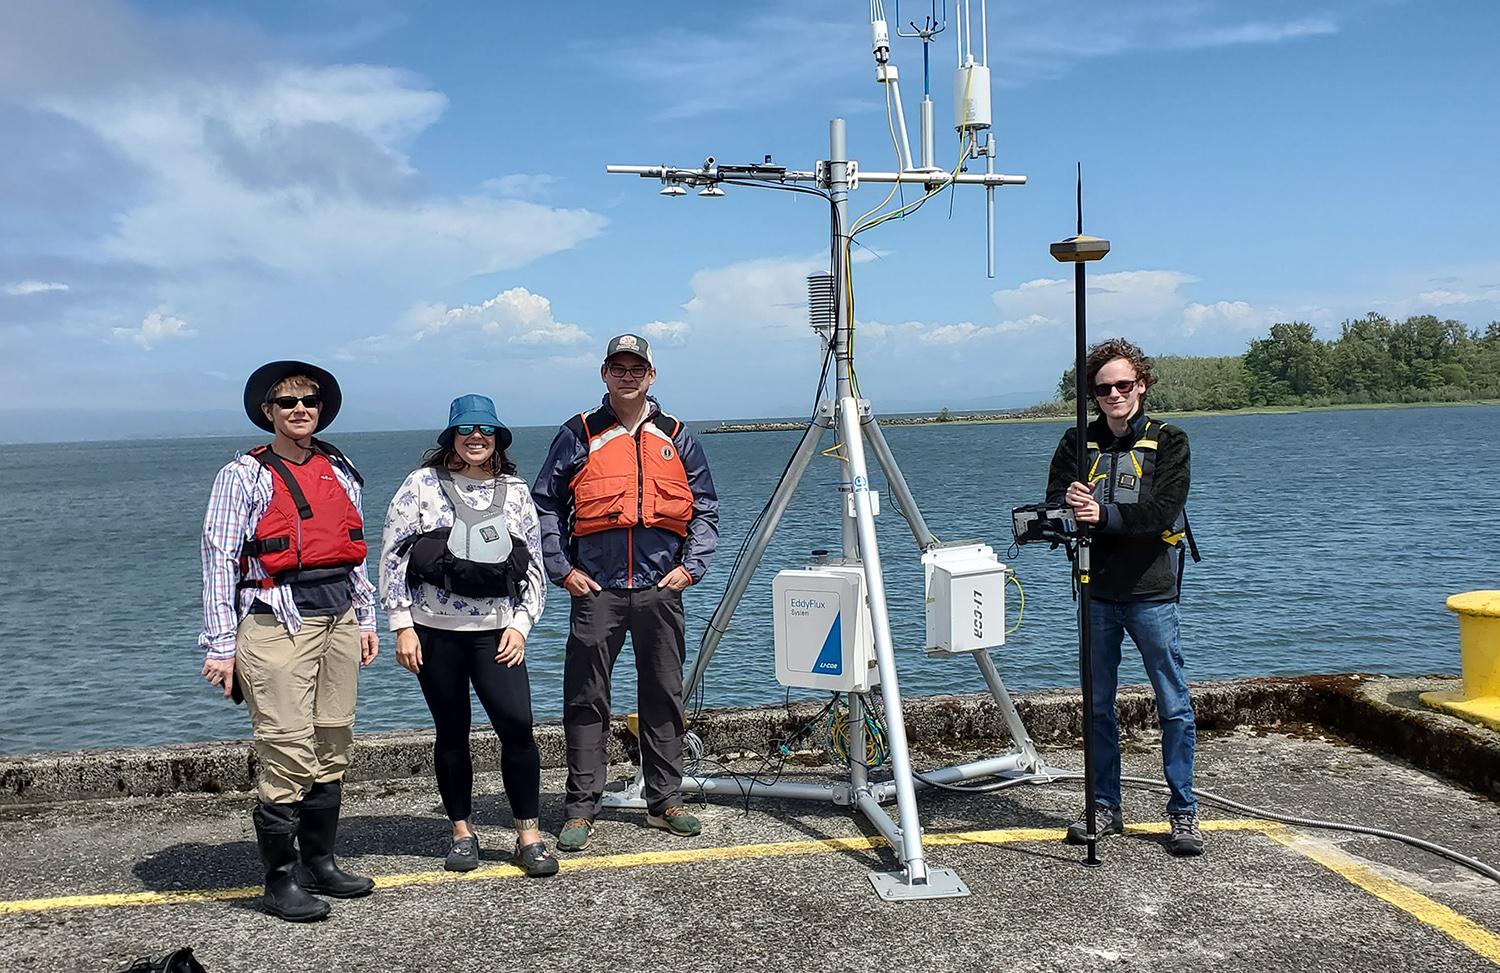 group of four researchers in life jackets stand on a pier by an eddy flux tower